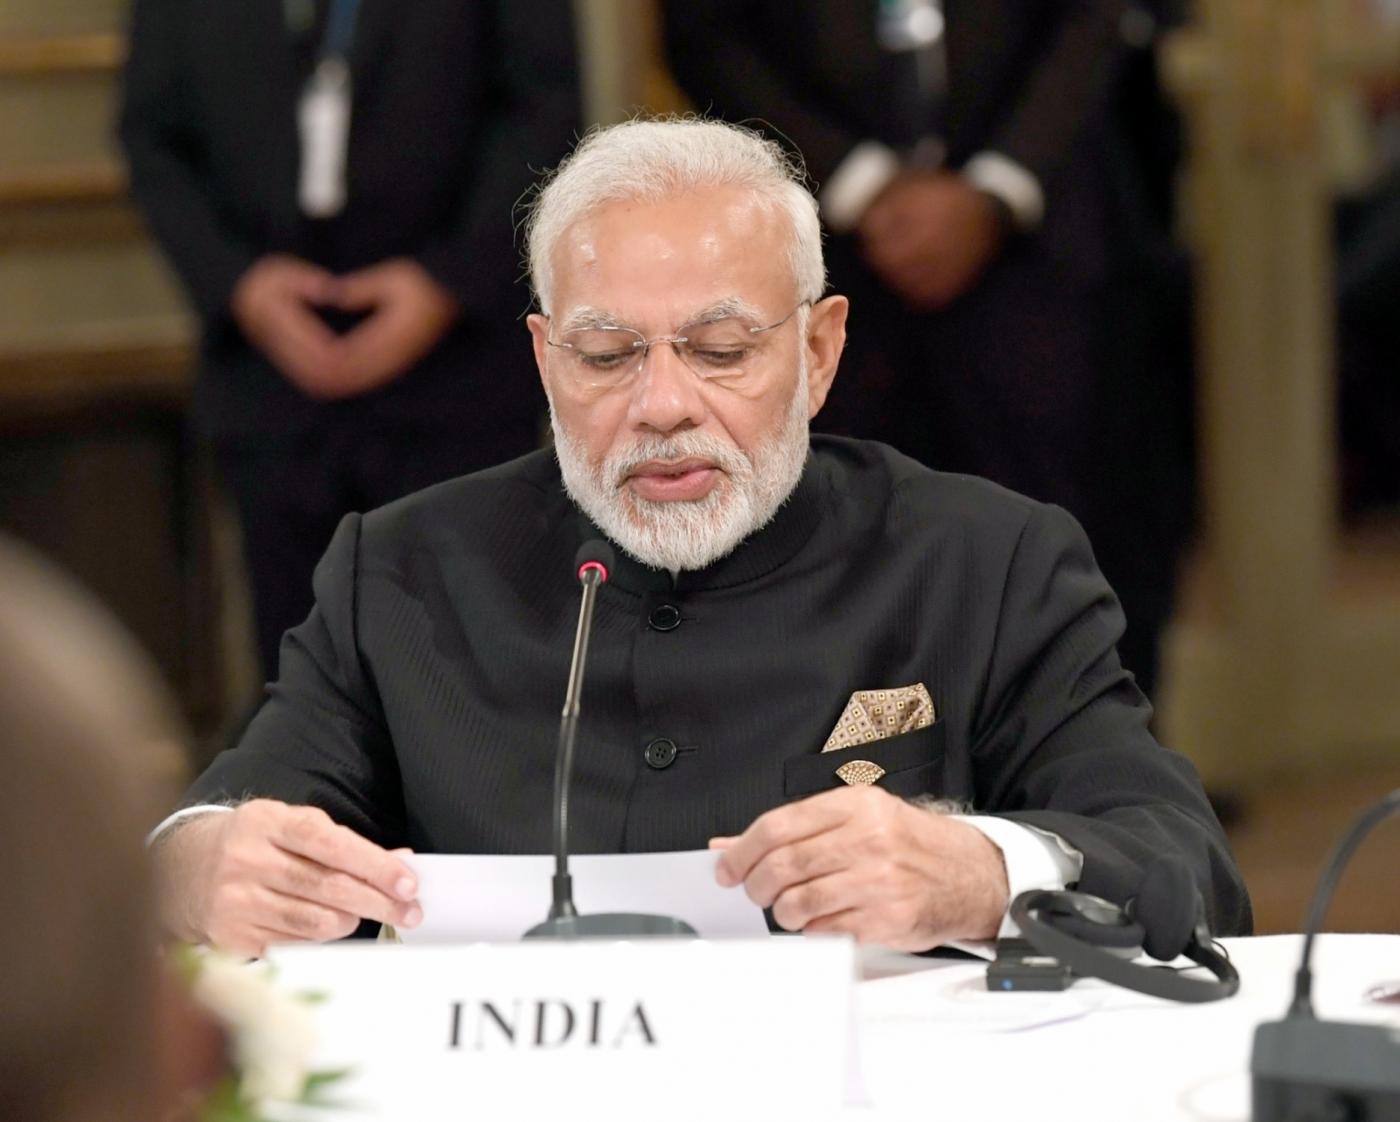 Buenos Aires: Prime Minister Narendra Modi at the RIC (Russia, India, China) Informal Summit, in Buenos Aires, Argentina on Nov 30, 2018. (Photo: IANS/PIB) by .